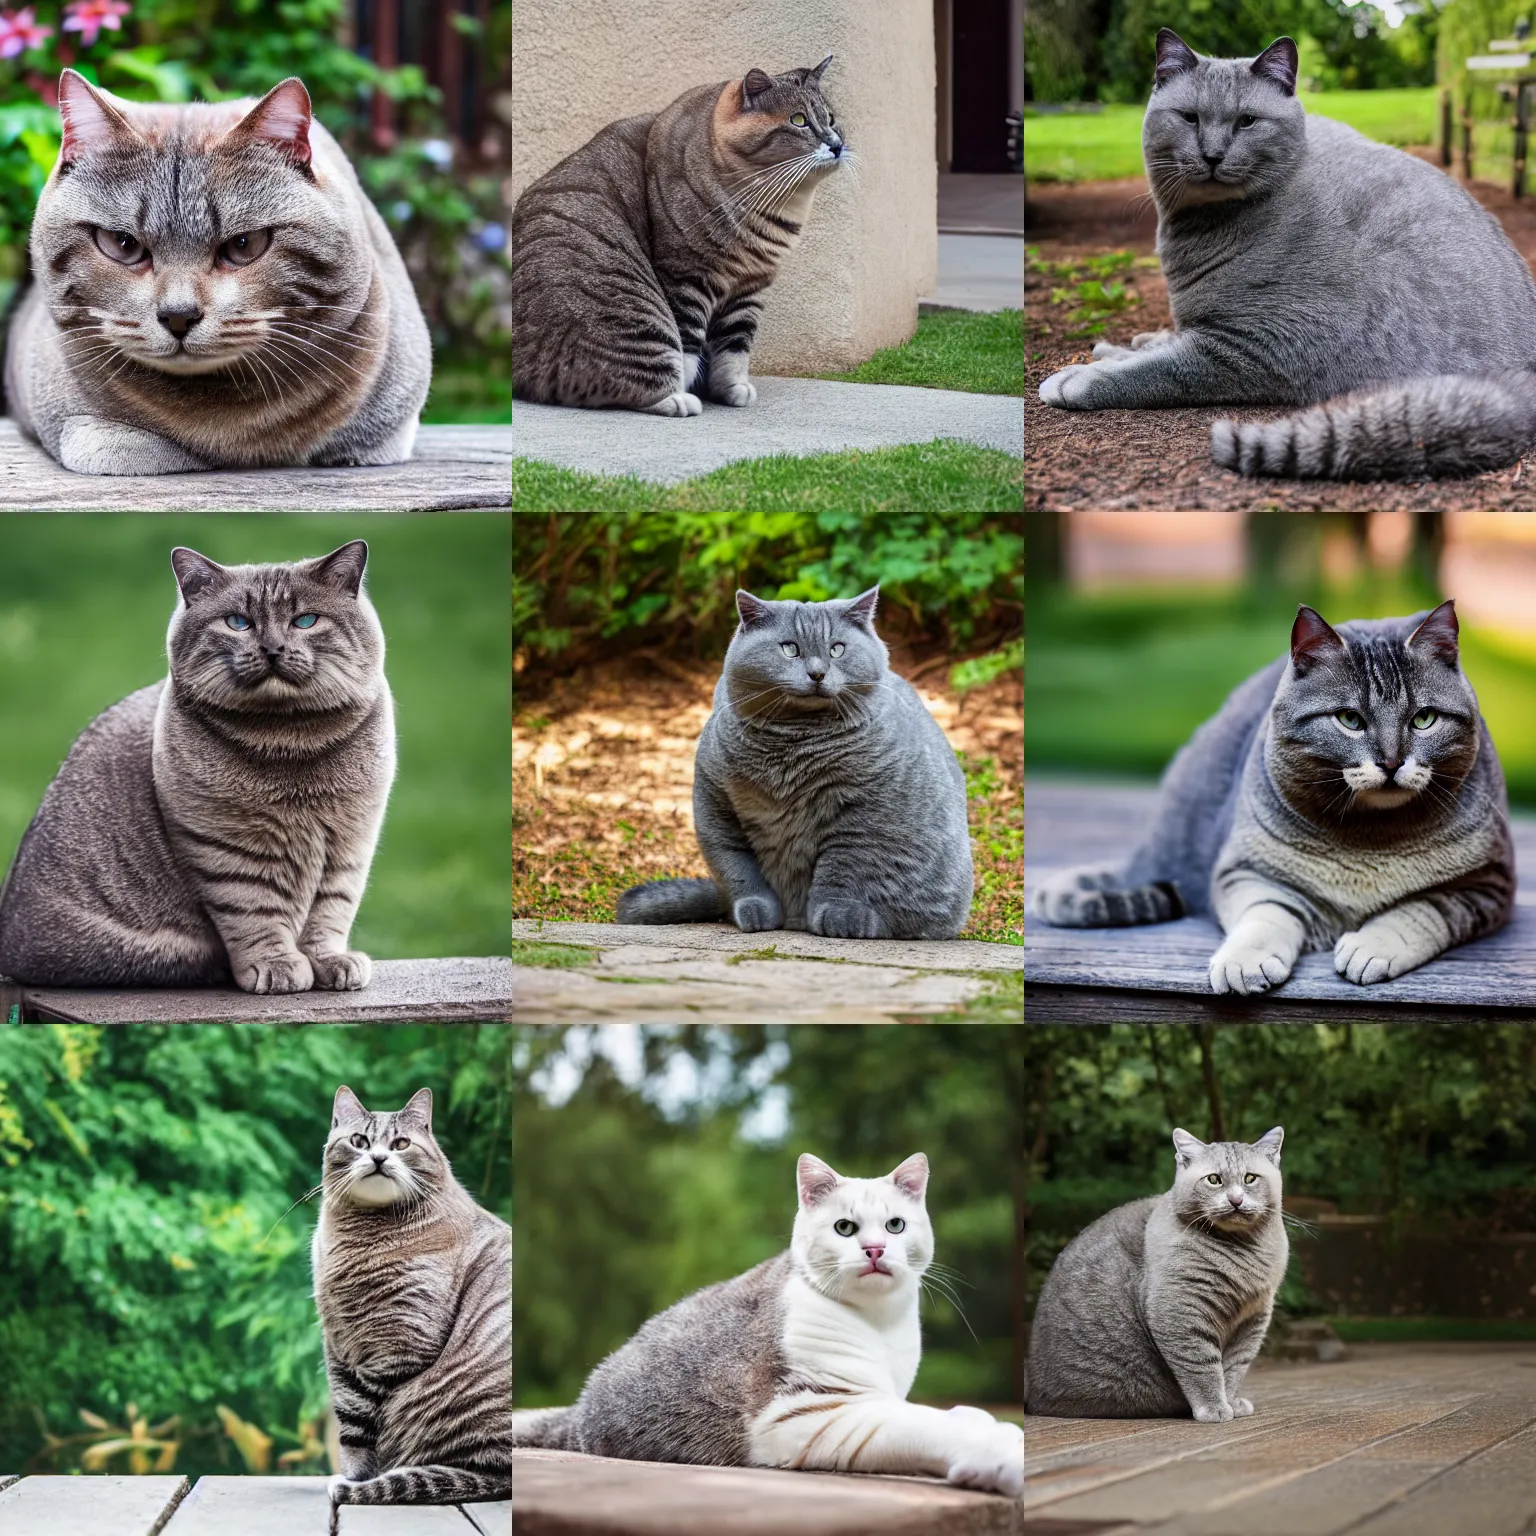 Prompt: full body view of a massive Chonker Cat sitting outdoors, professional photo, beautiful cat feet, XF IQ4, 150MP, 50mm, F1.4, ISO 200, 1/160s, natural light